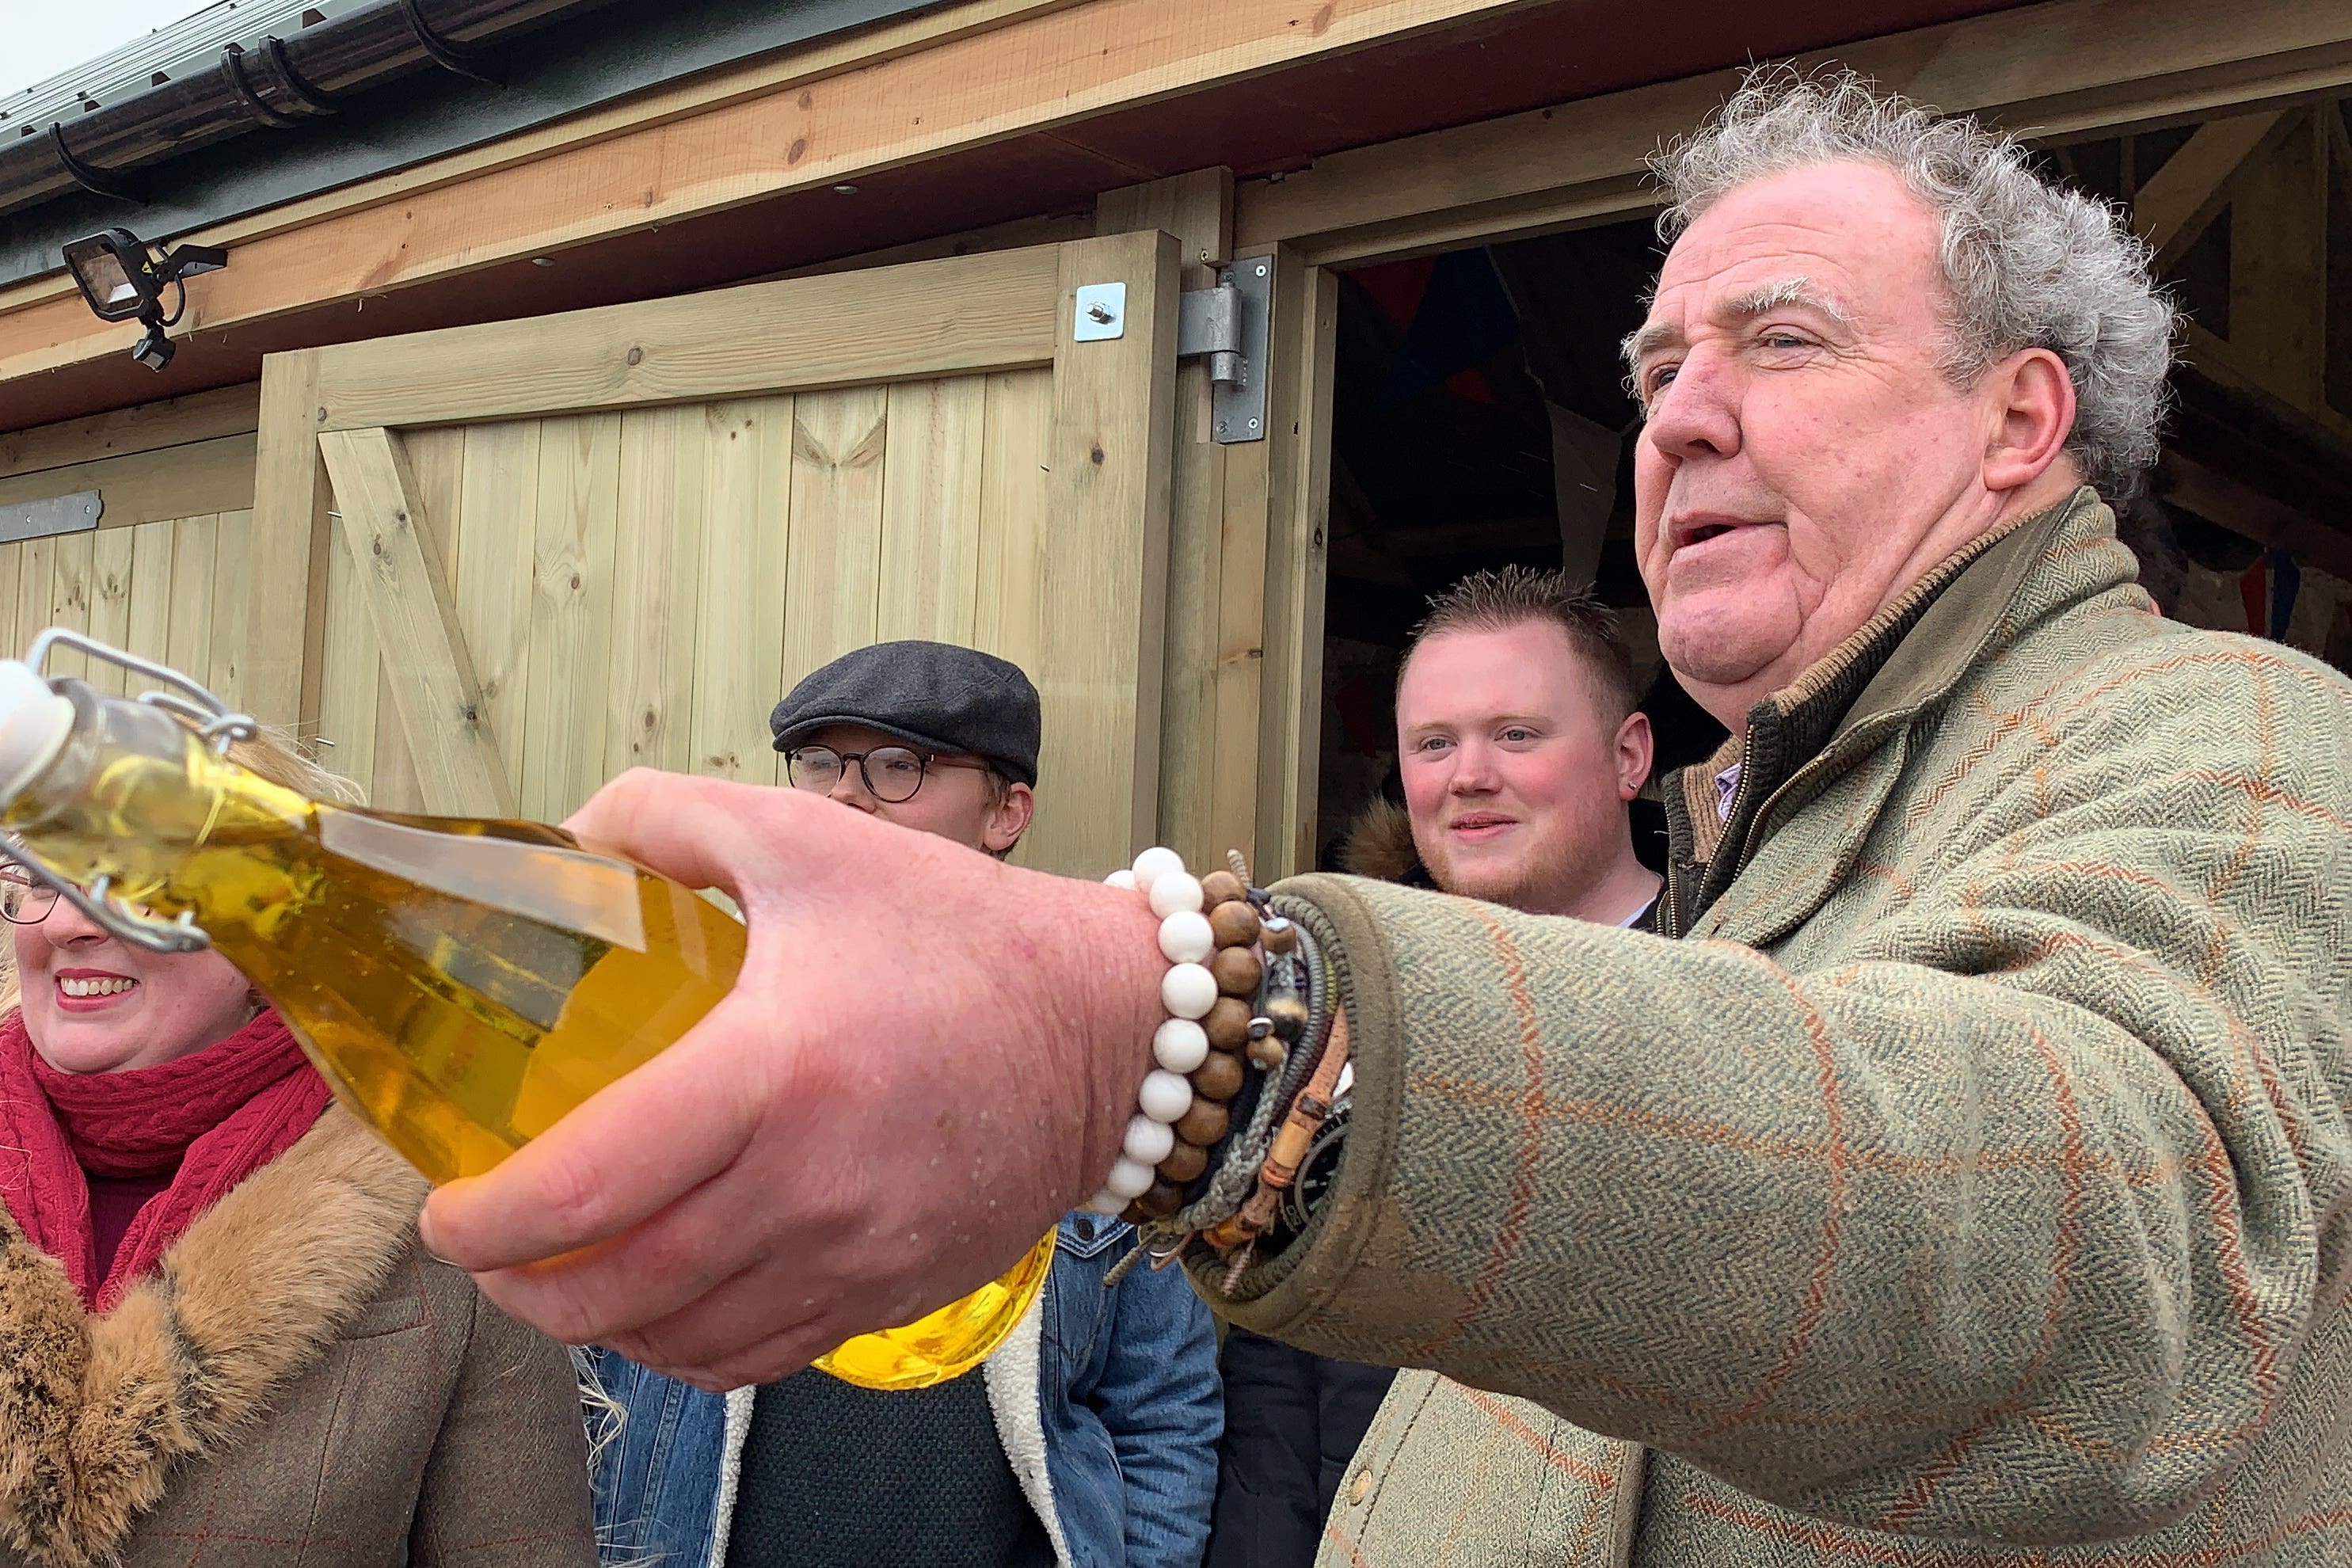 Jeremy Clarkson isn’t wrong when he says we need to pay more for food